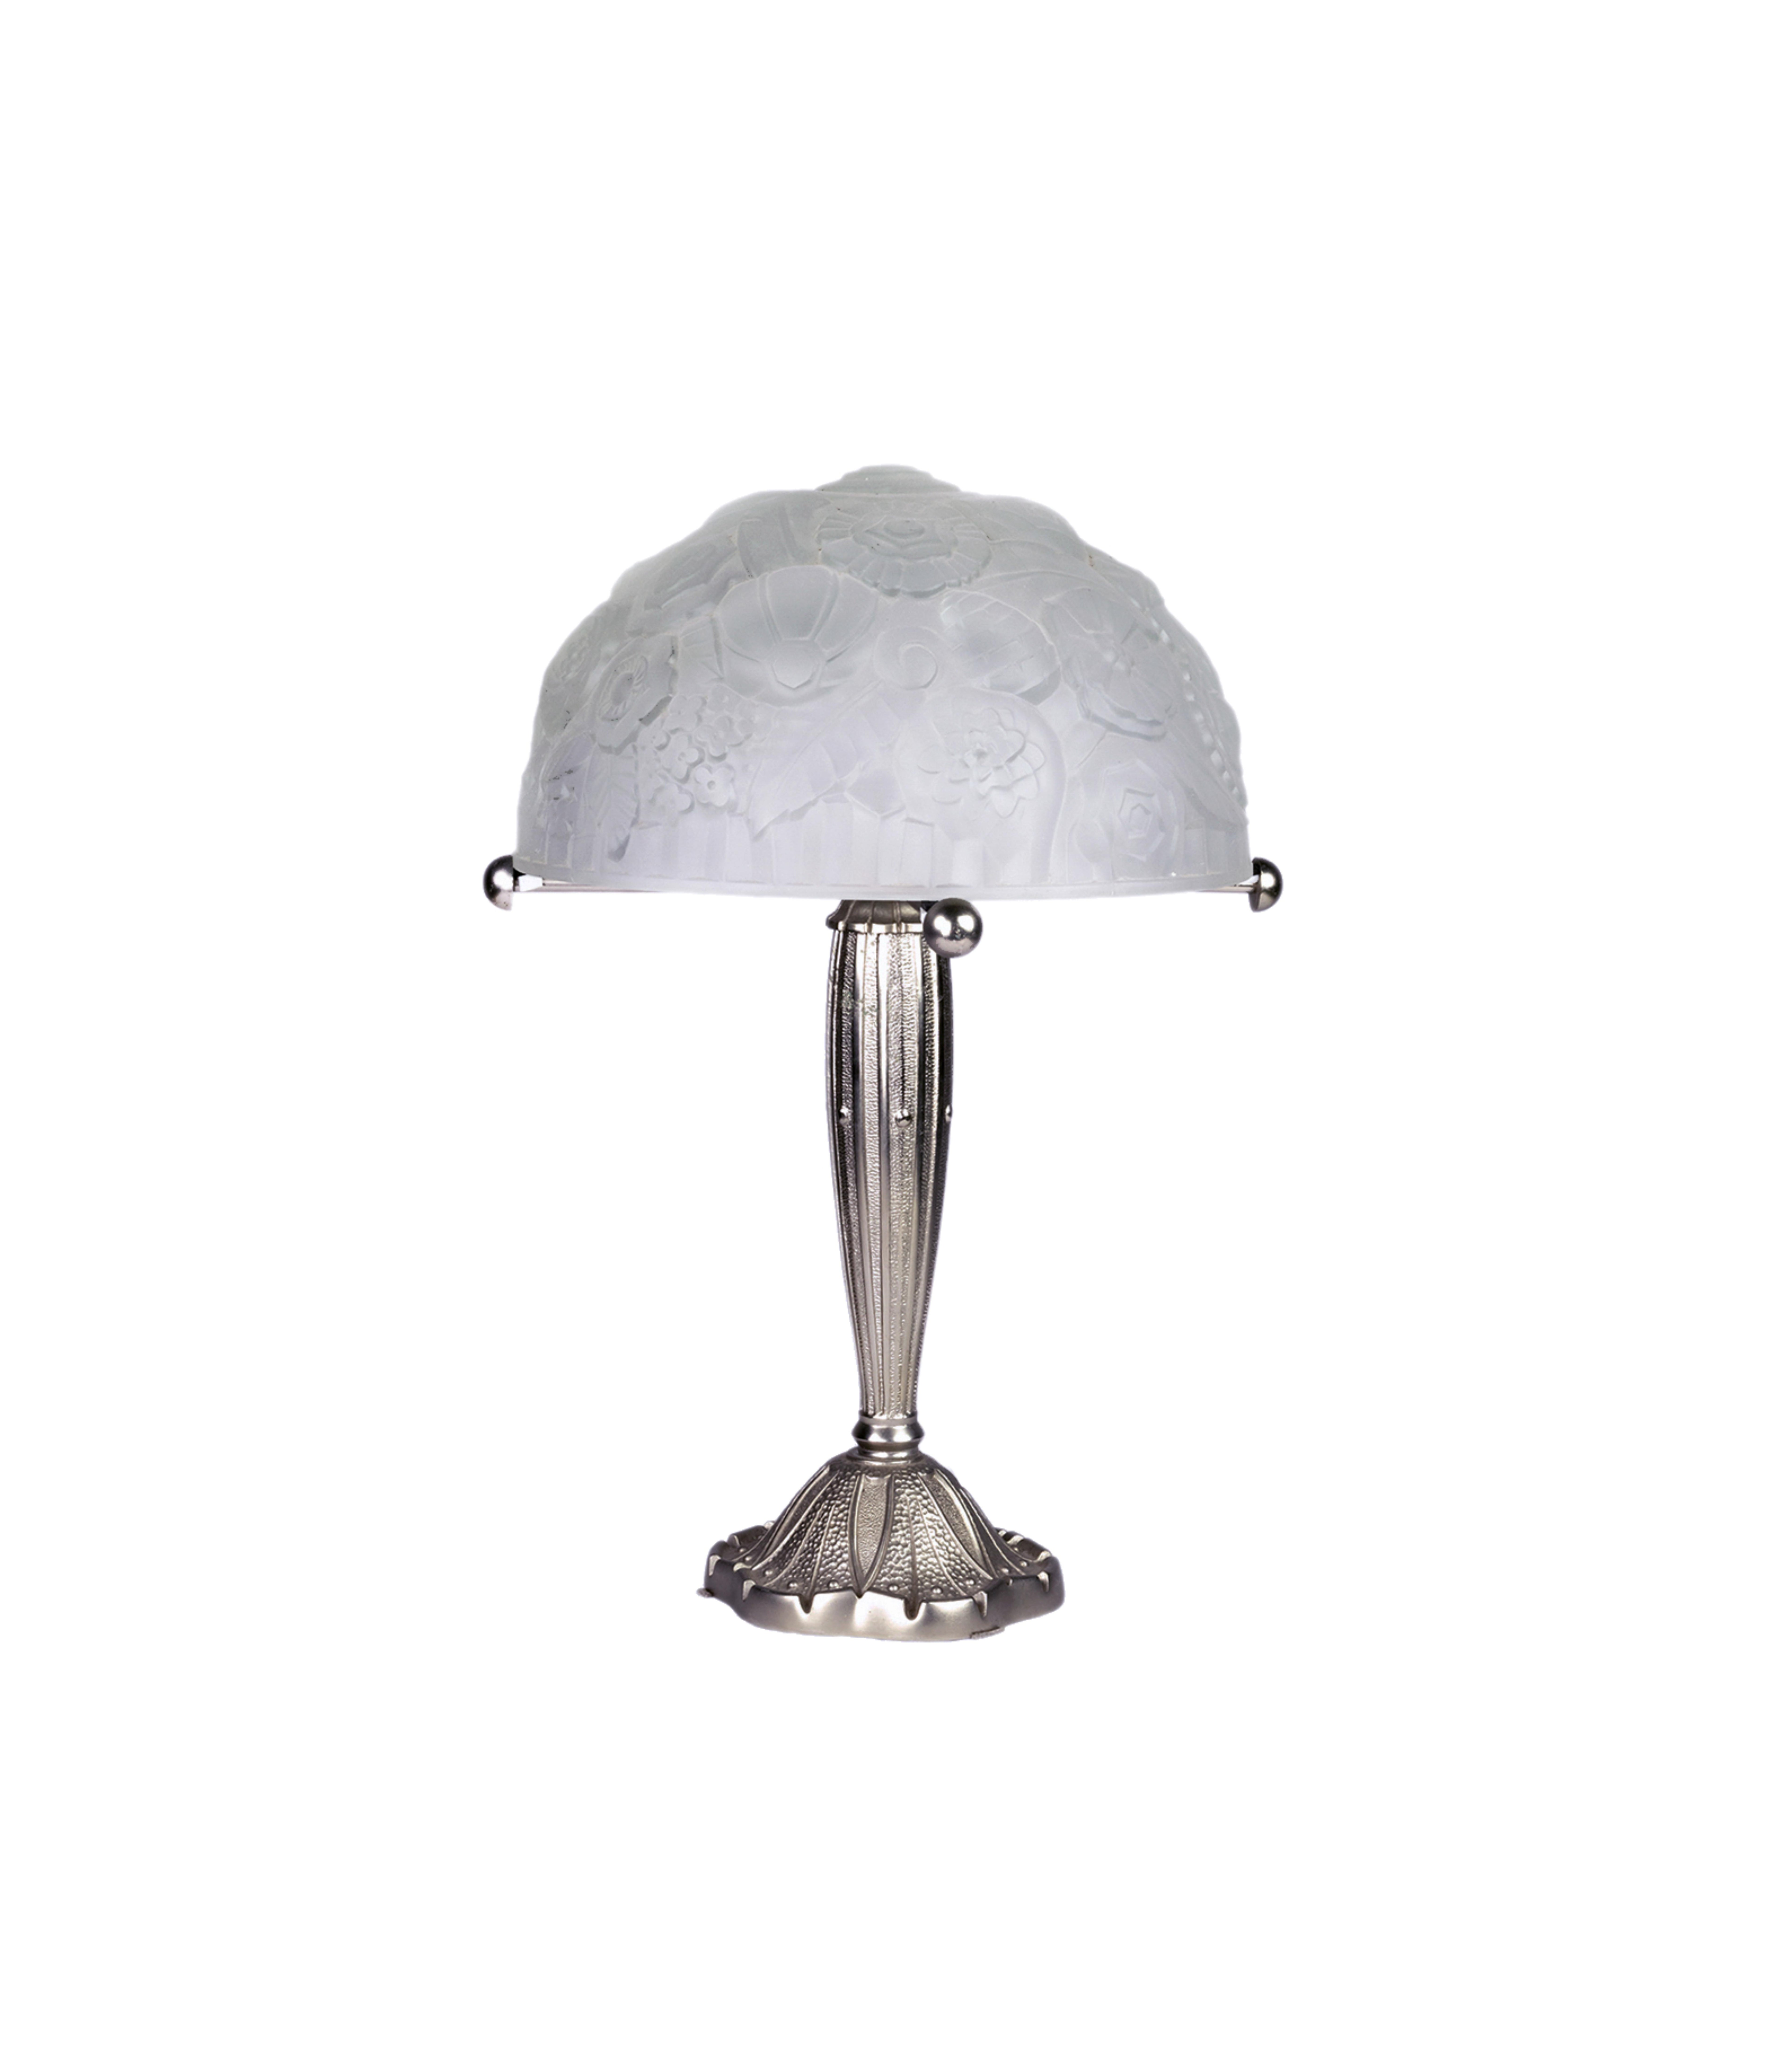 This table lamp embodies the distinctive style of René Lalique, featuring a letterhead and a brushed effect on its nickeled brass structure. It serves as a subtle transitional piece, seamlessly bridging the gap between Art Nouveau and Art Deco with